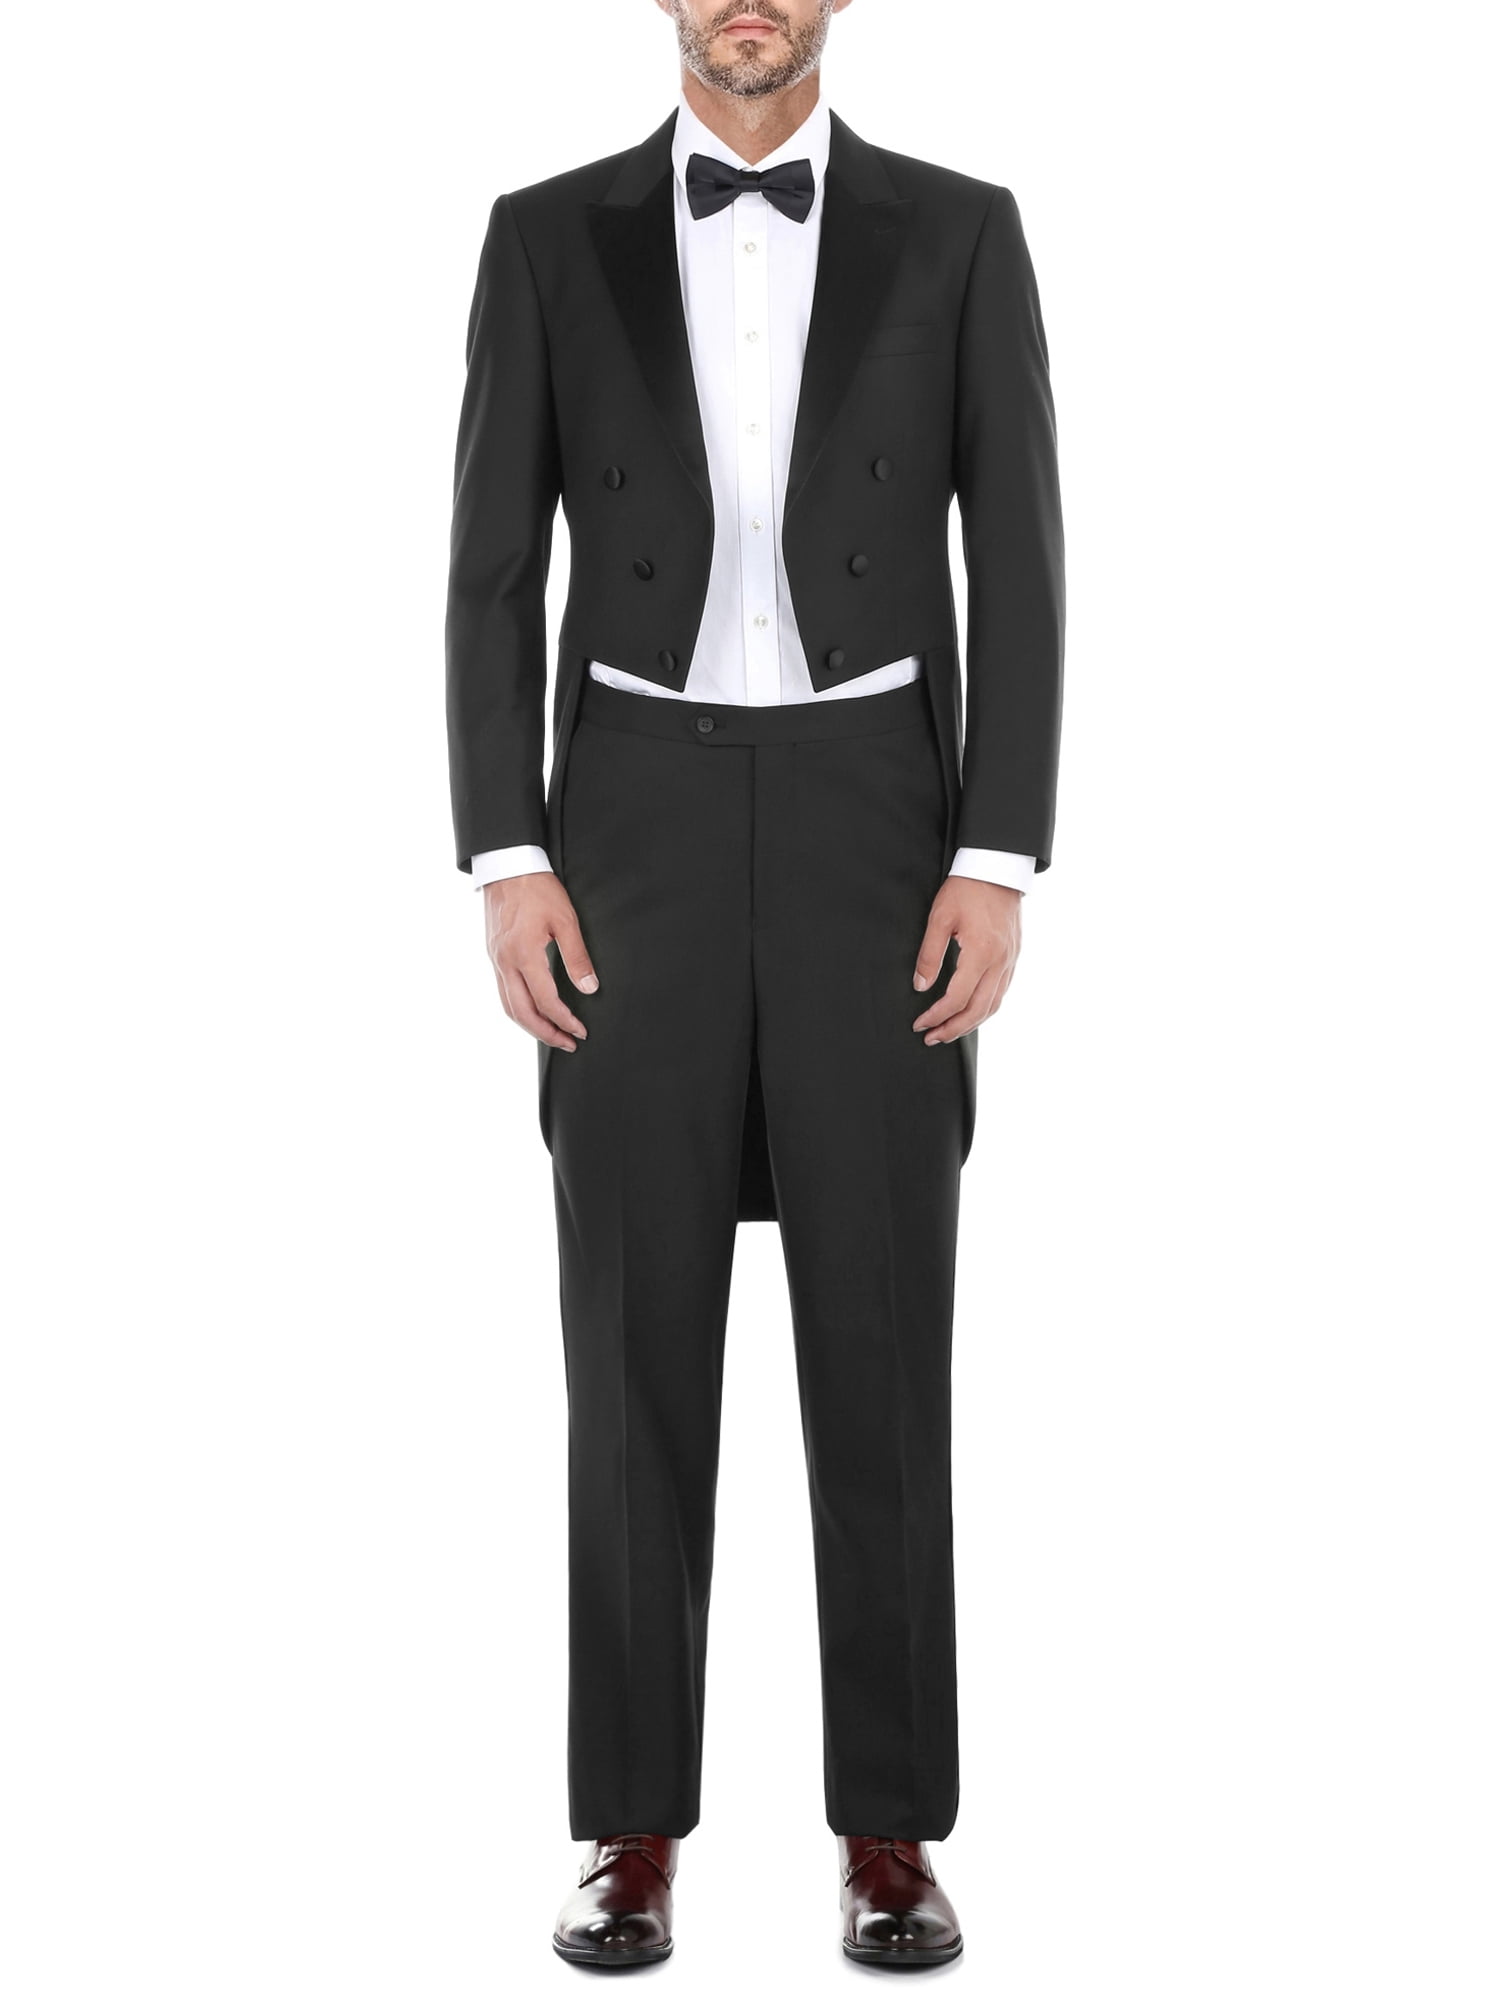 6-Piece Complete Tuxedo Package with Vest & Bow-Tie Sizes 34-64 Long 